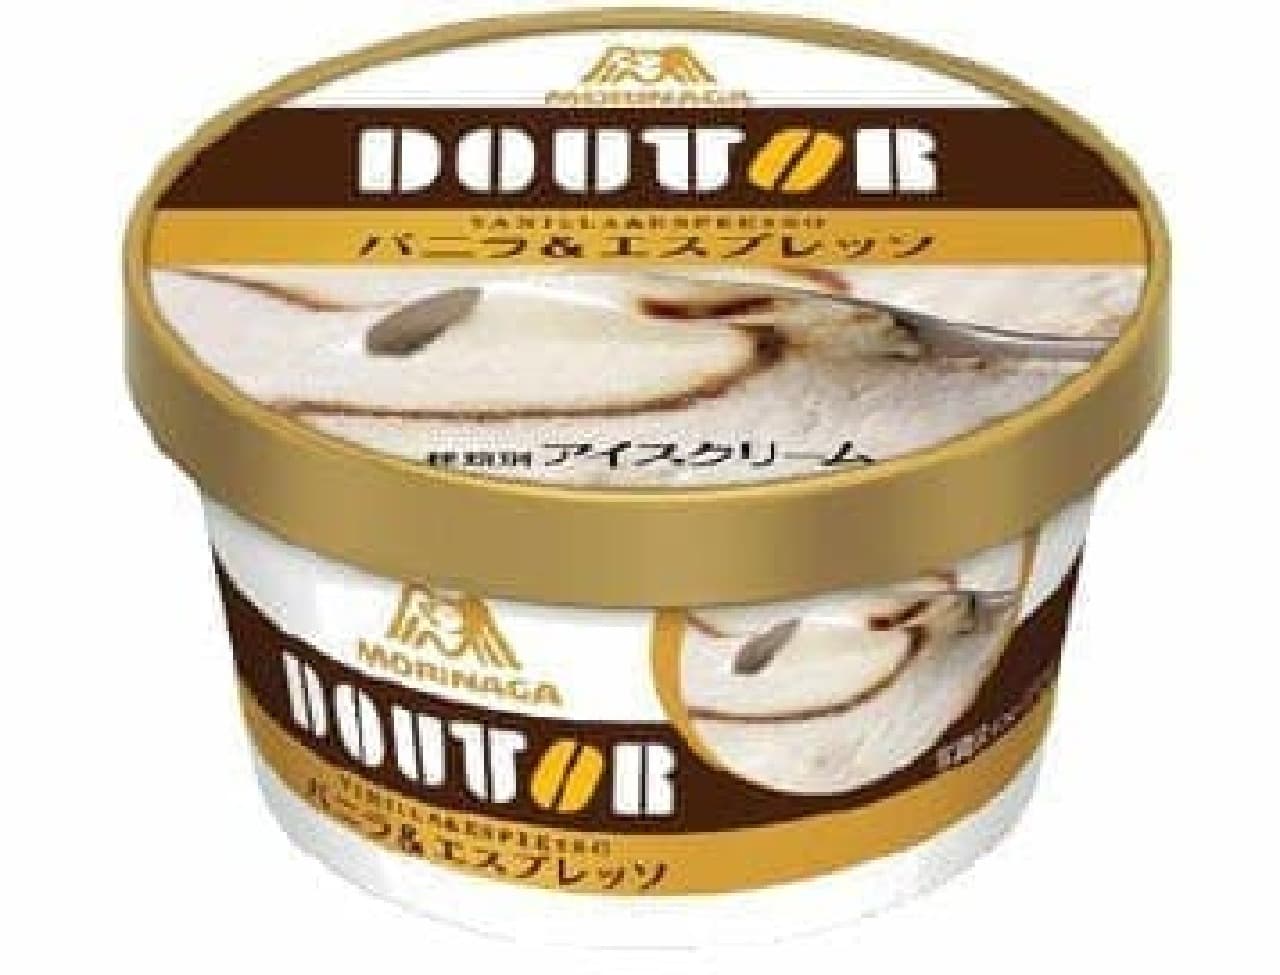 Introducing "adult" coffee ice cream in collaboration with Doutor